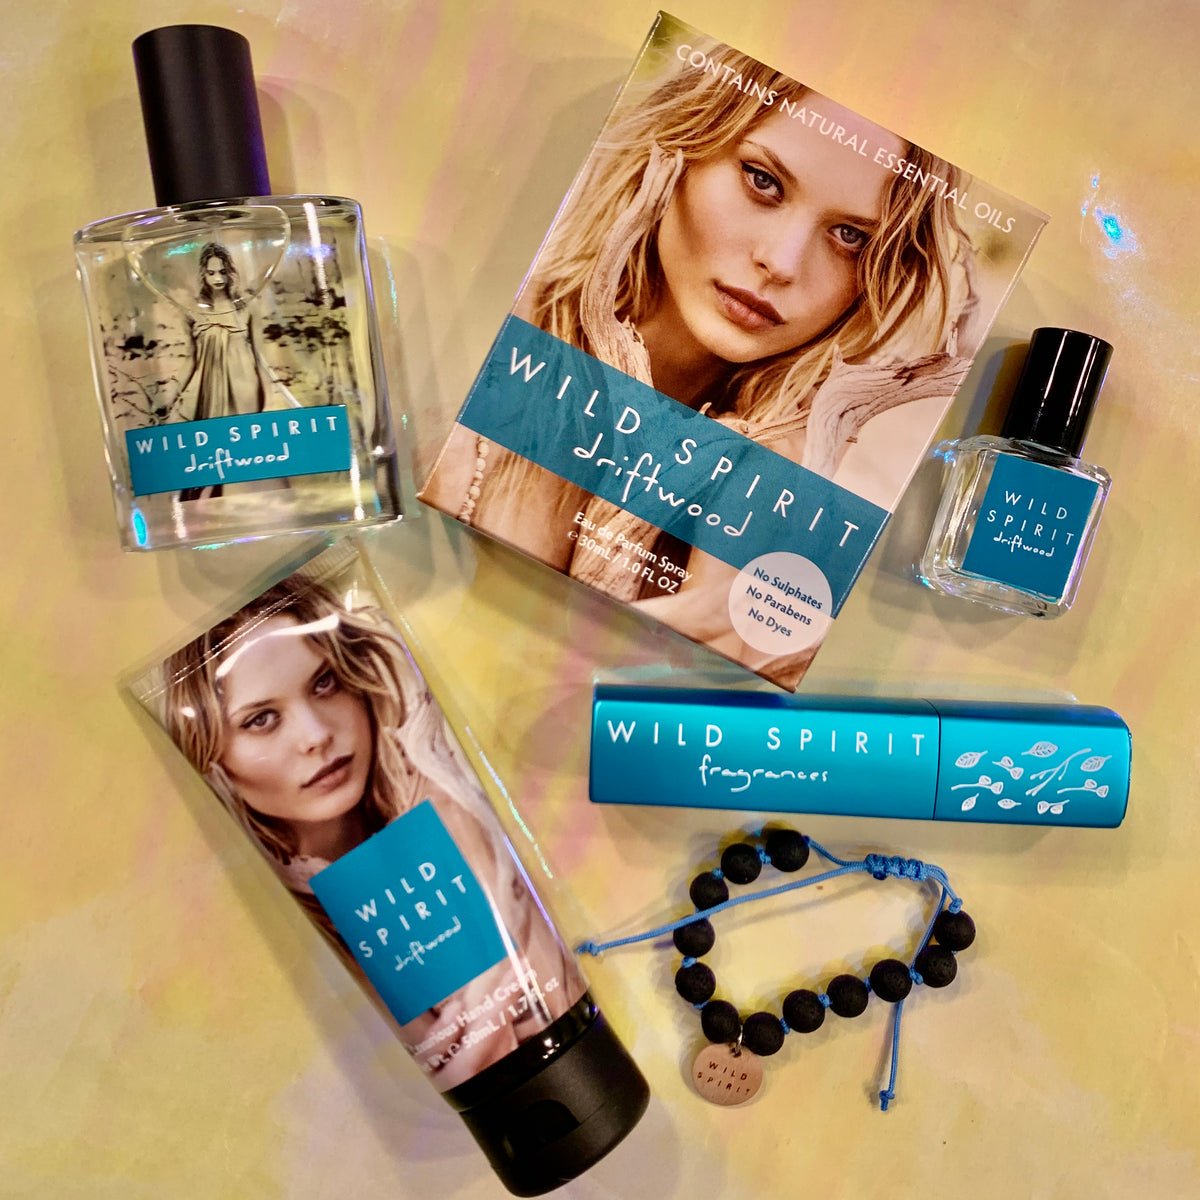 Looking for the perfect gift for your minimalist, beachy bestie? We’ve got you covered. The Driftwood Lovers Perfume Gift Set gives you Driftwood vibes whenever and wherever you need a little fresh and airy touch-up. With salty ocean notes highlighted by a star jasmine signature enhanced with specialty mint notes, this scent is the epitome of fresh and FABULOUS without even trying.